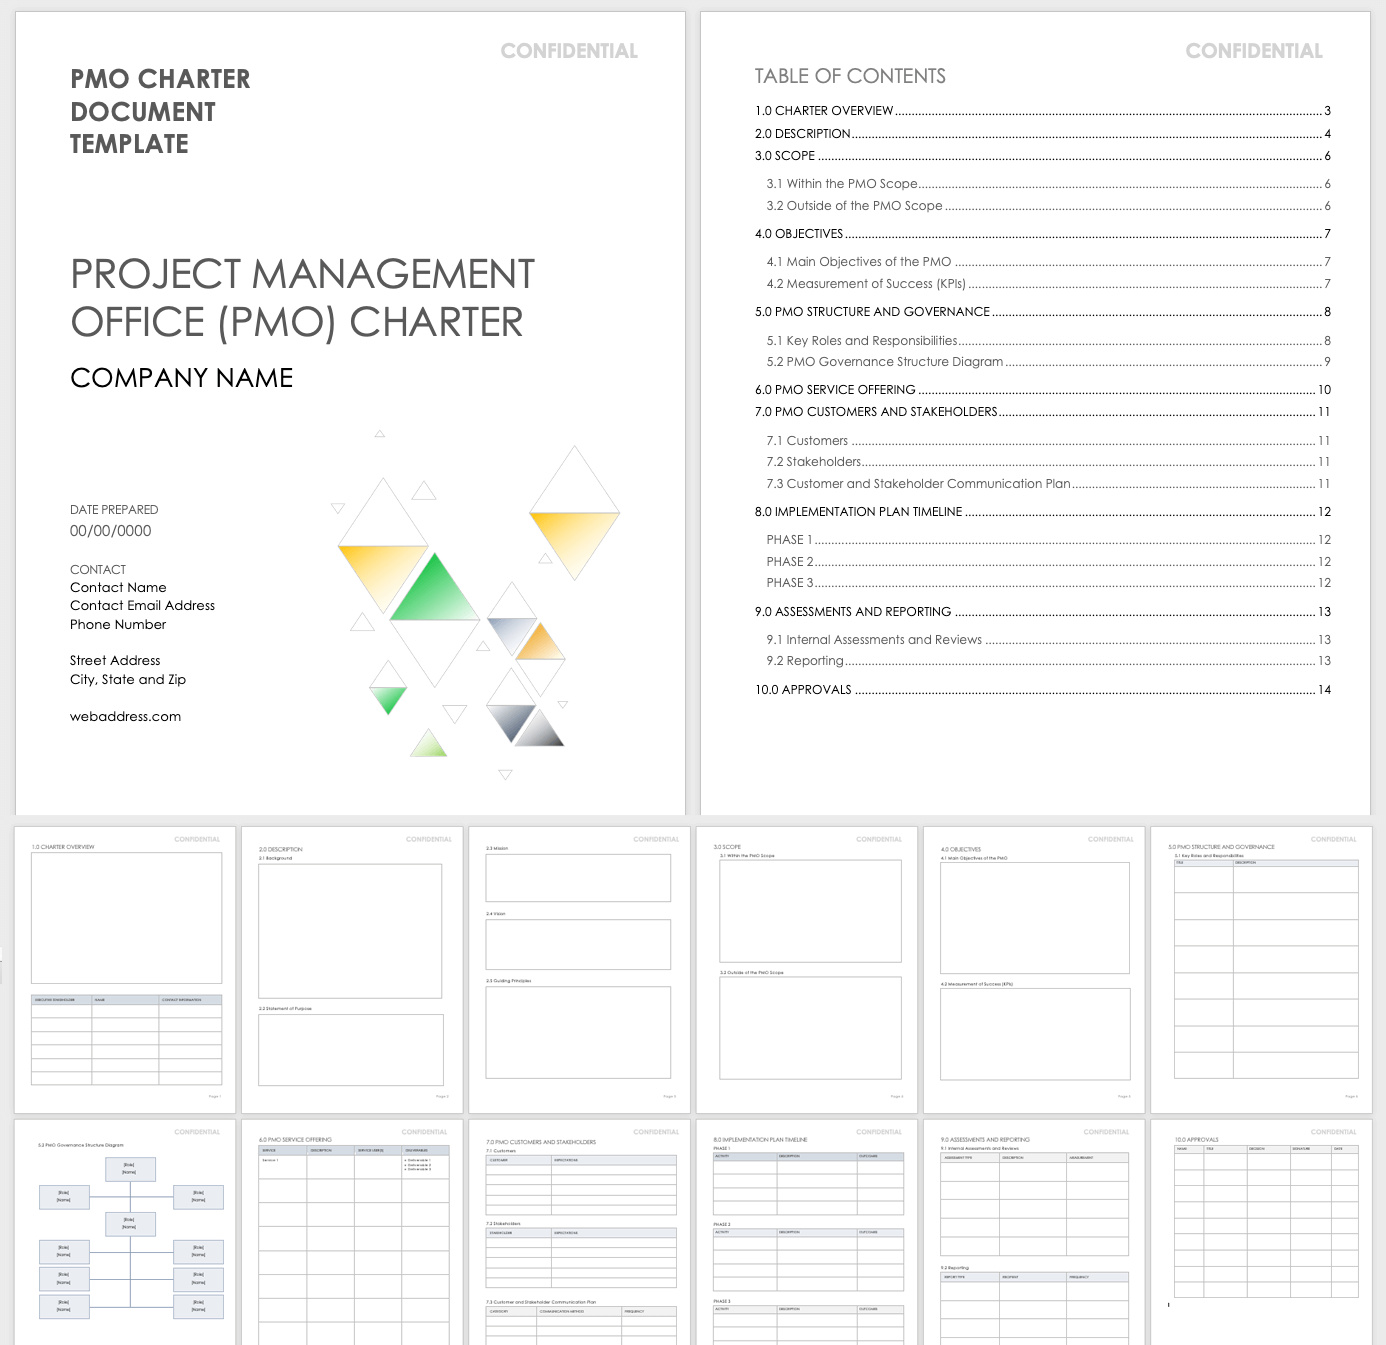 PMO Charter Document Template